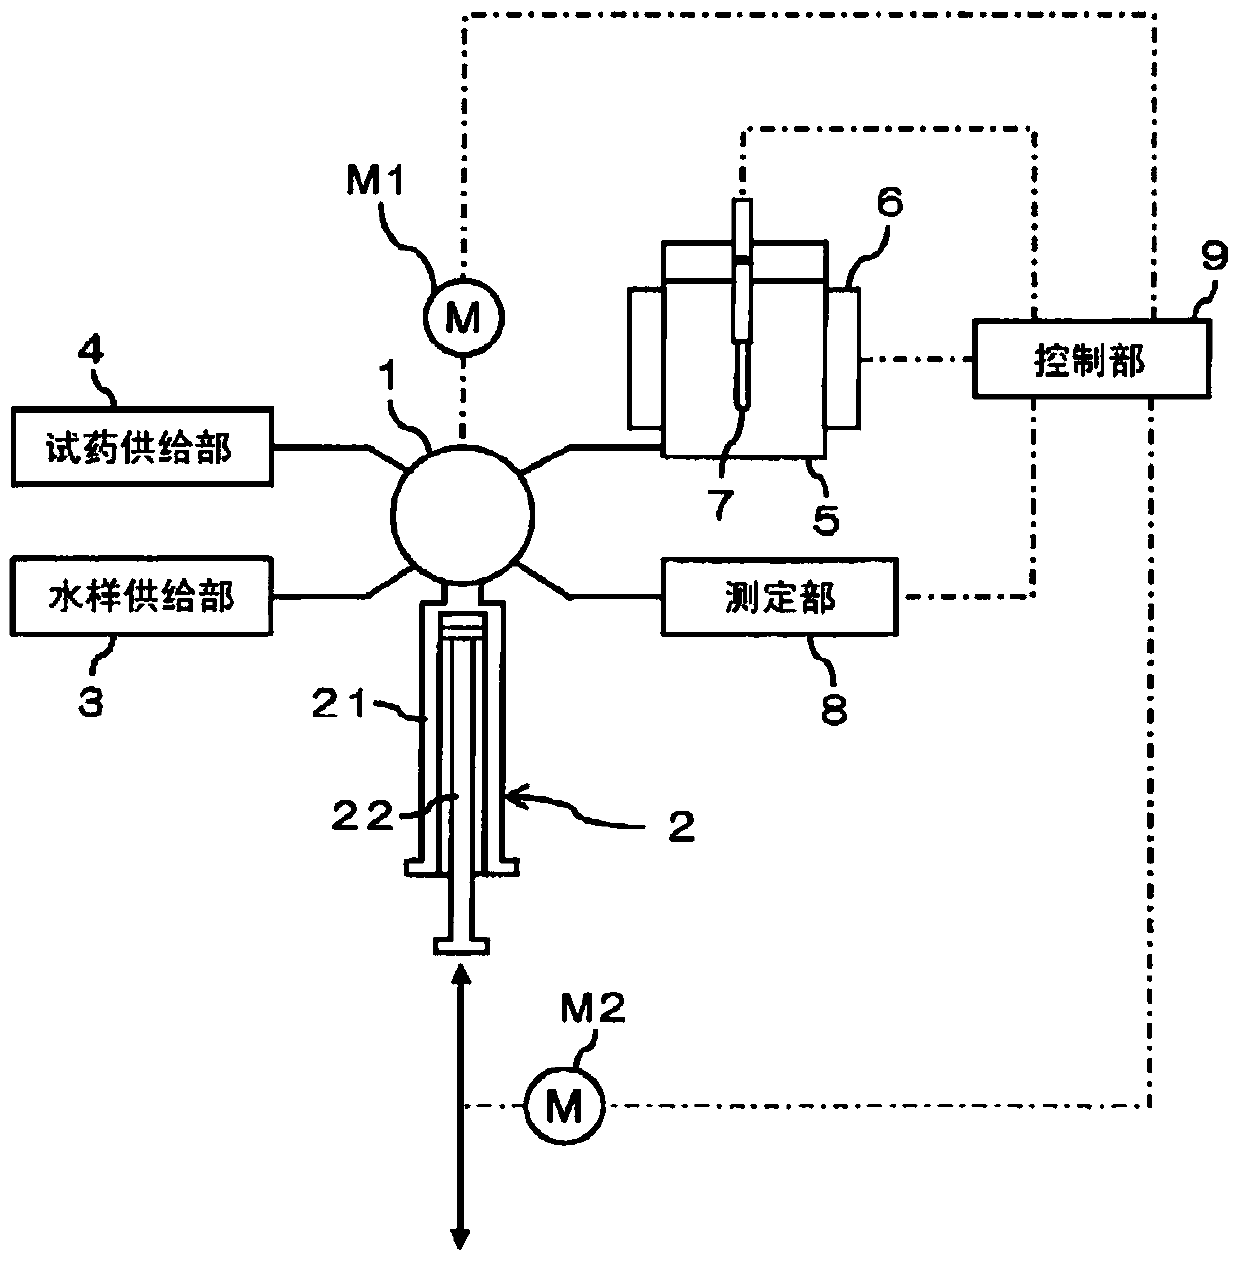 Ultraviolet irradiation device and analysis device having the ultraviolet irradiation device